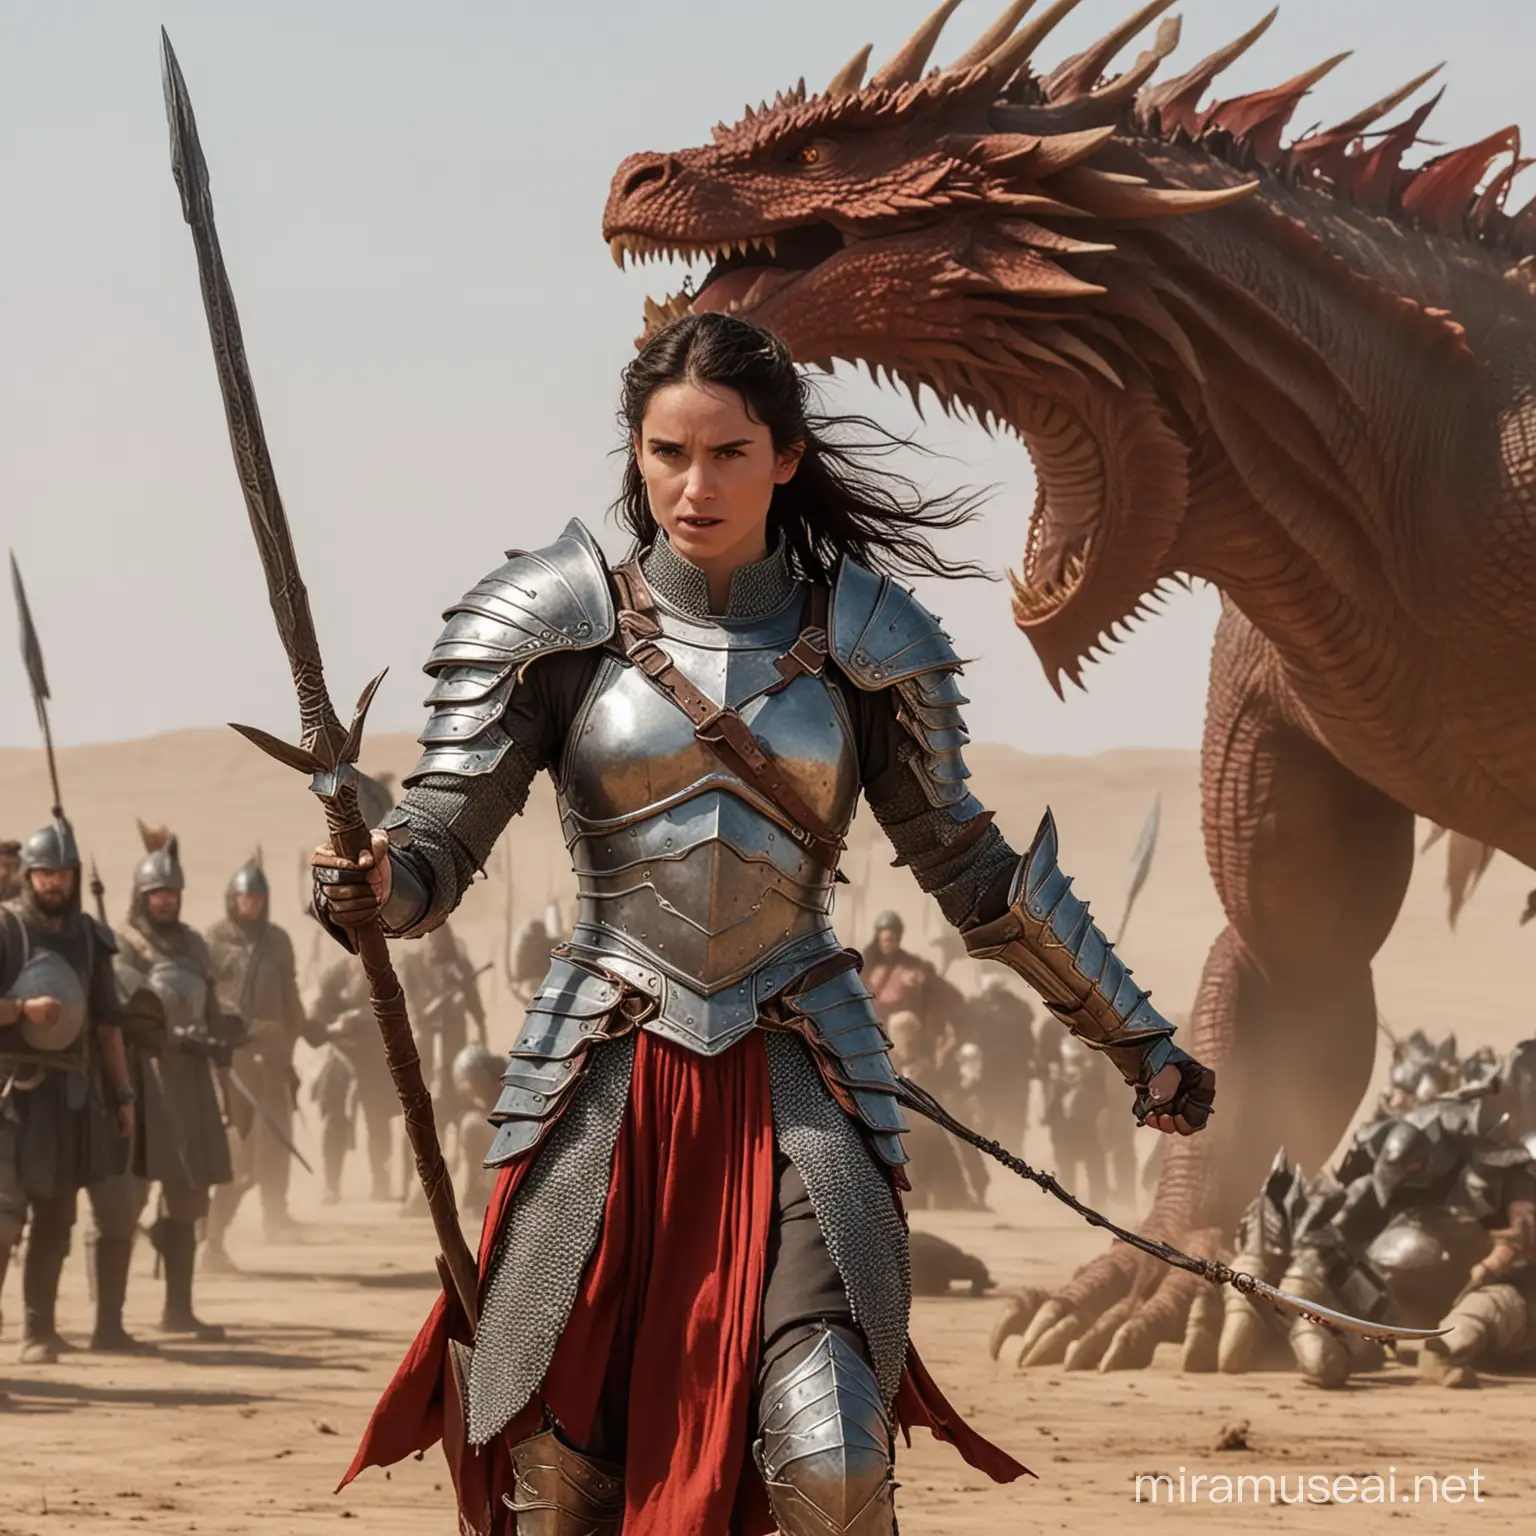 Young Jennifer Connely dressed in plate armor holding a long spear in one hand infront of a red dragon fighting in a battlefield with uruk-hai